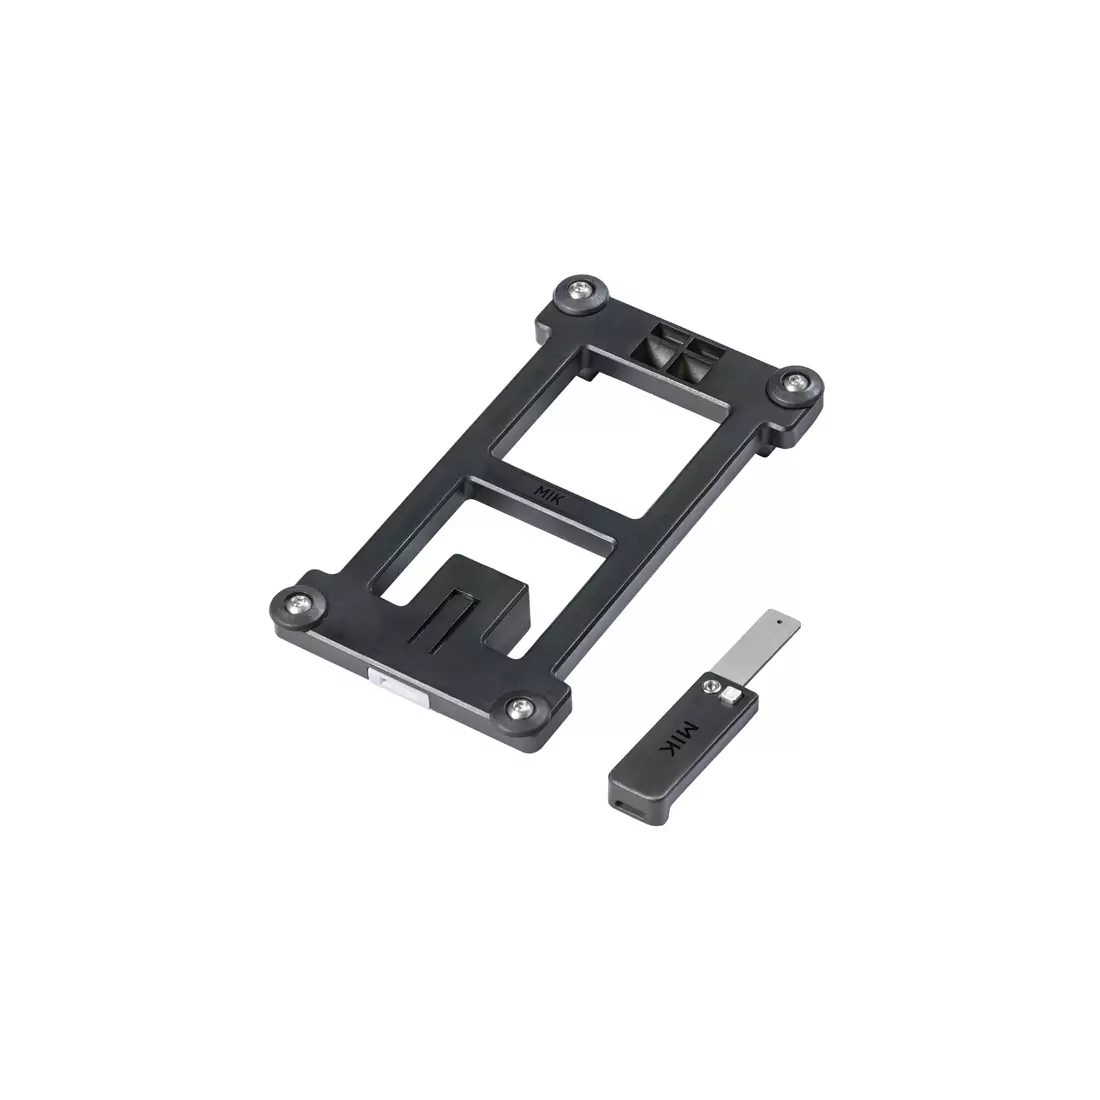 BASIL MIK ADAPTER PLATE Adapter for baskets, bags for mounting on the trunk BAS-70171